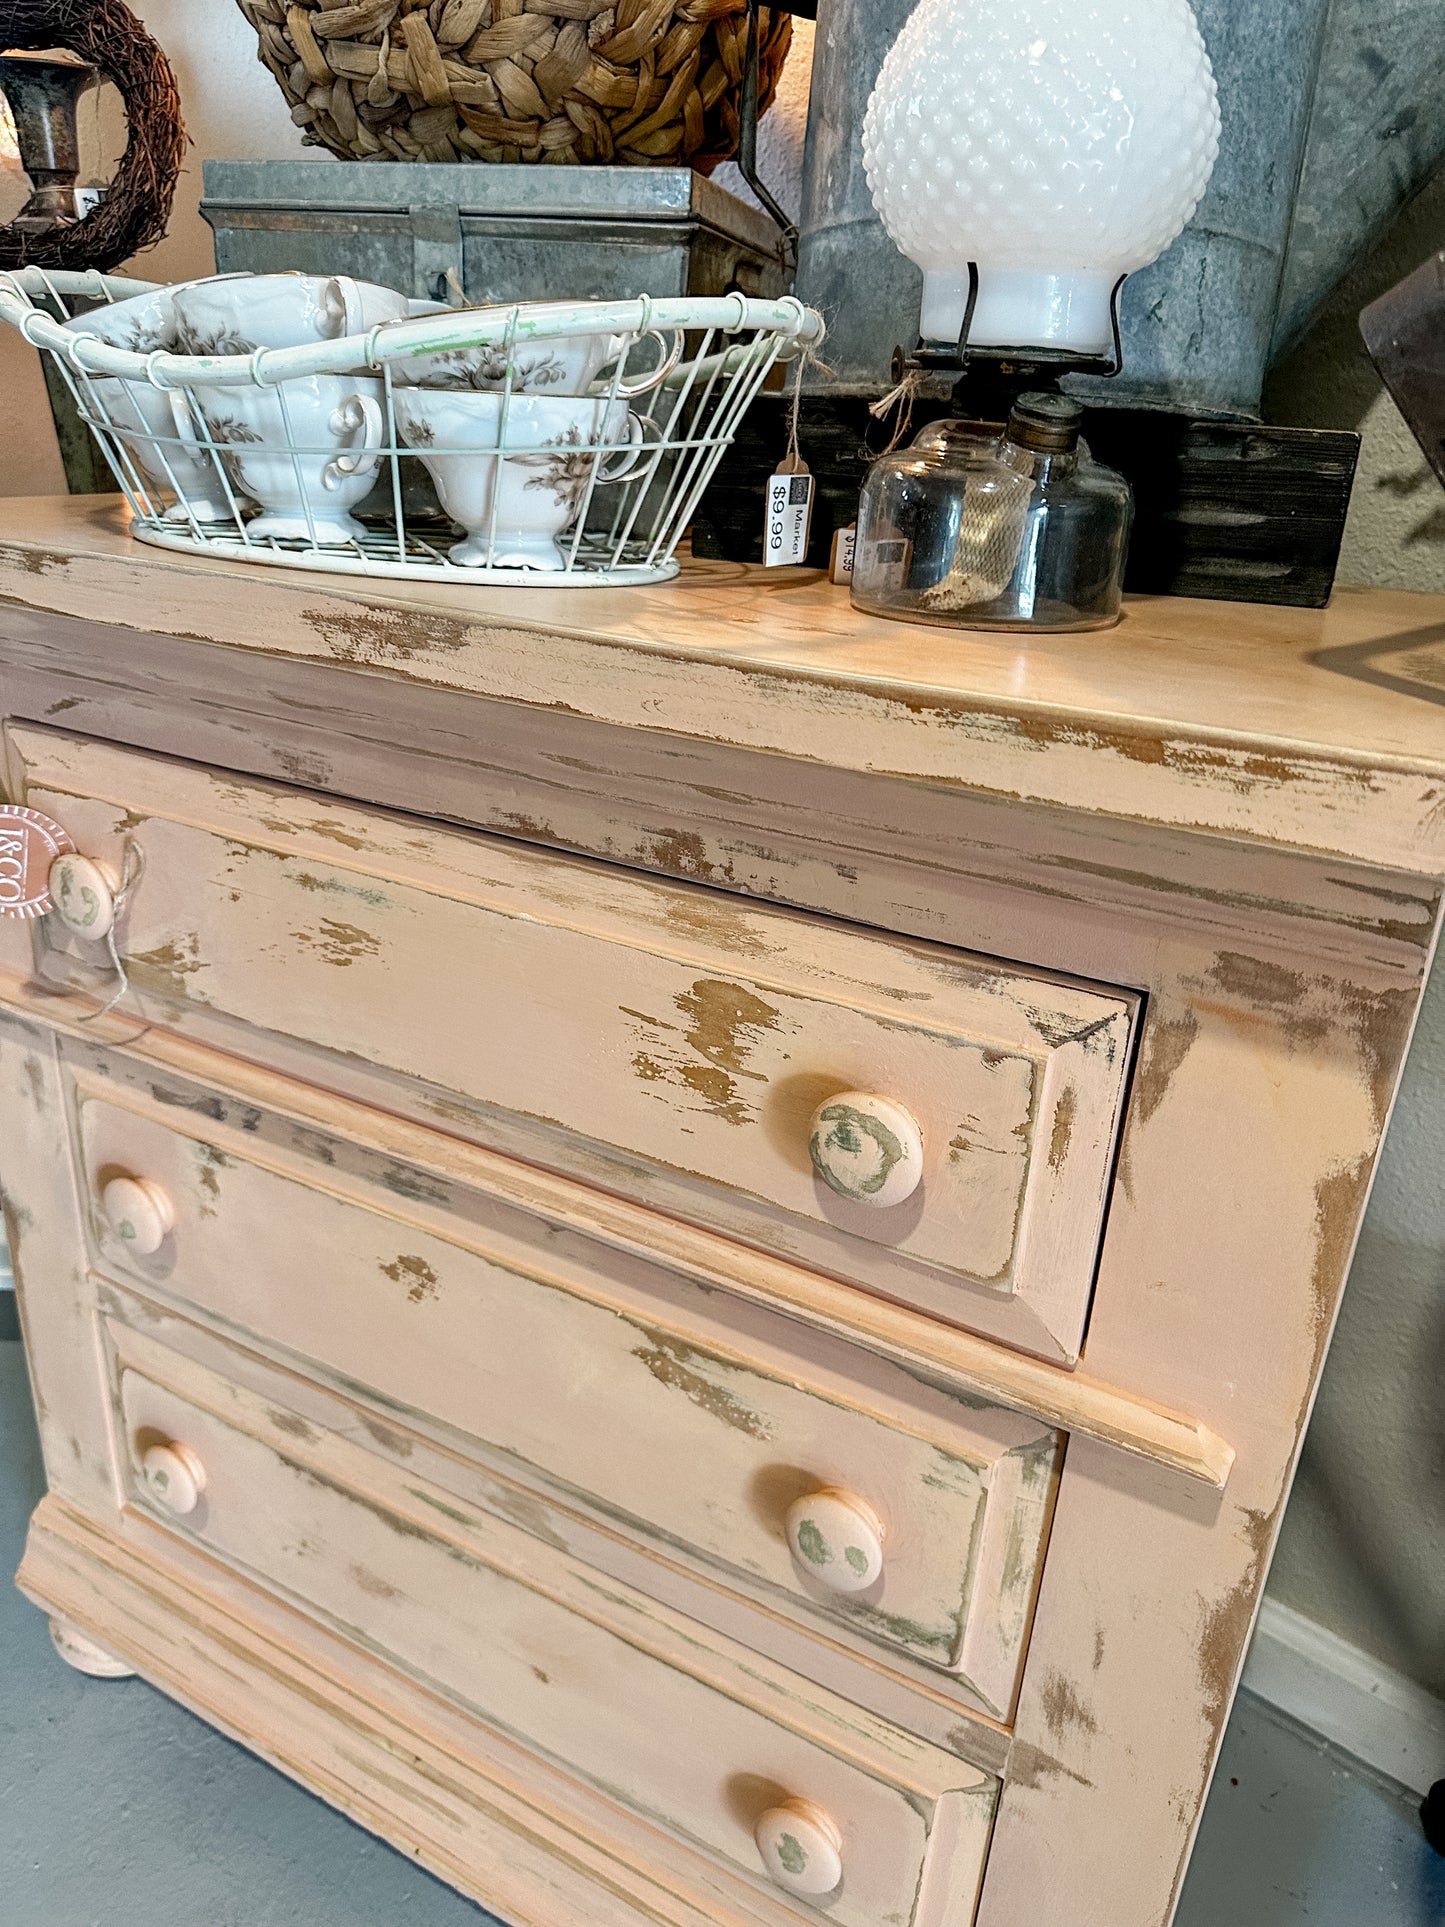 Vintage Broyhill Dresser Painted Coral and Distressed